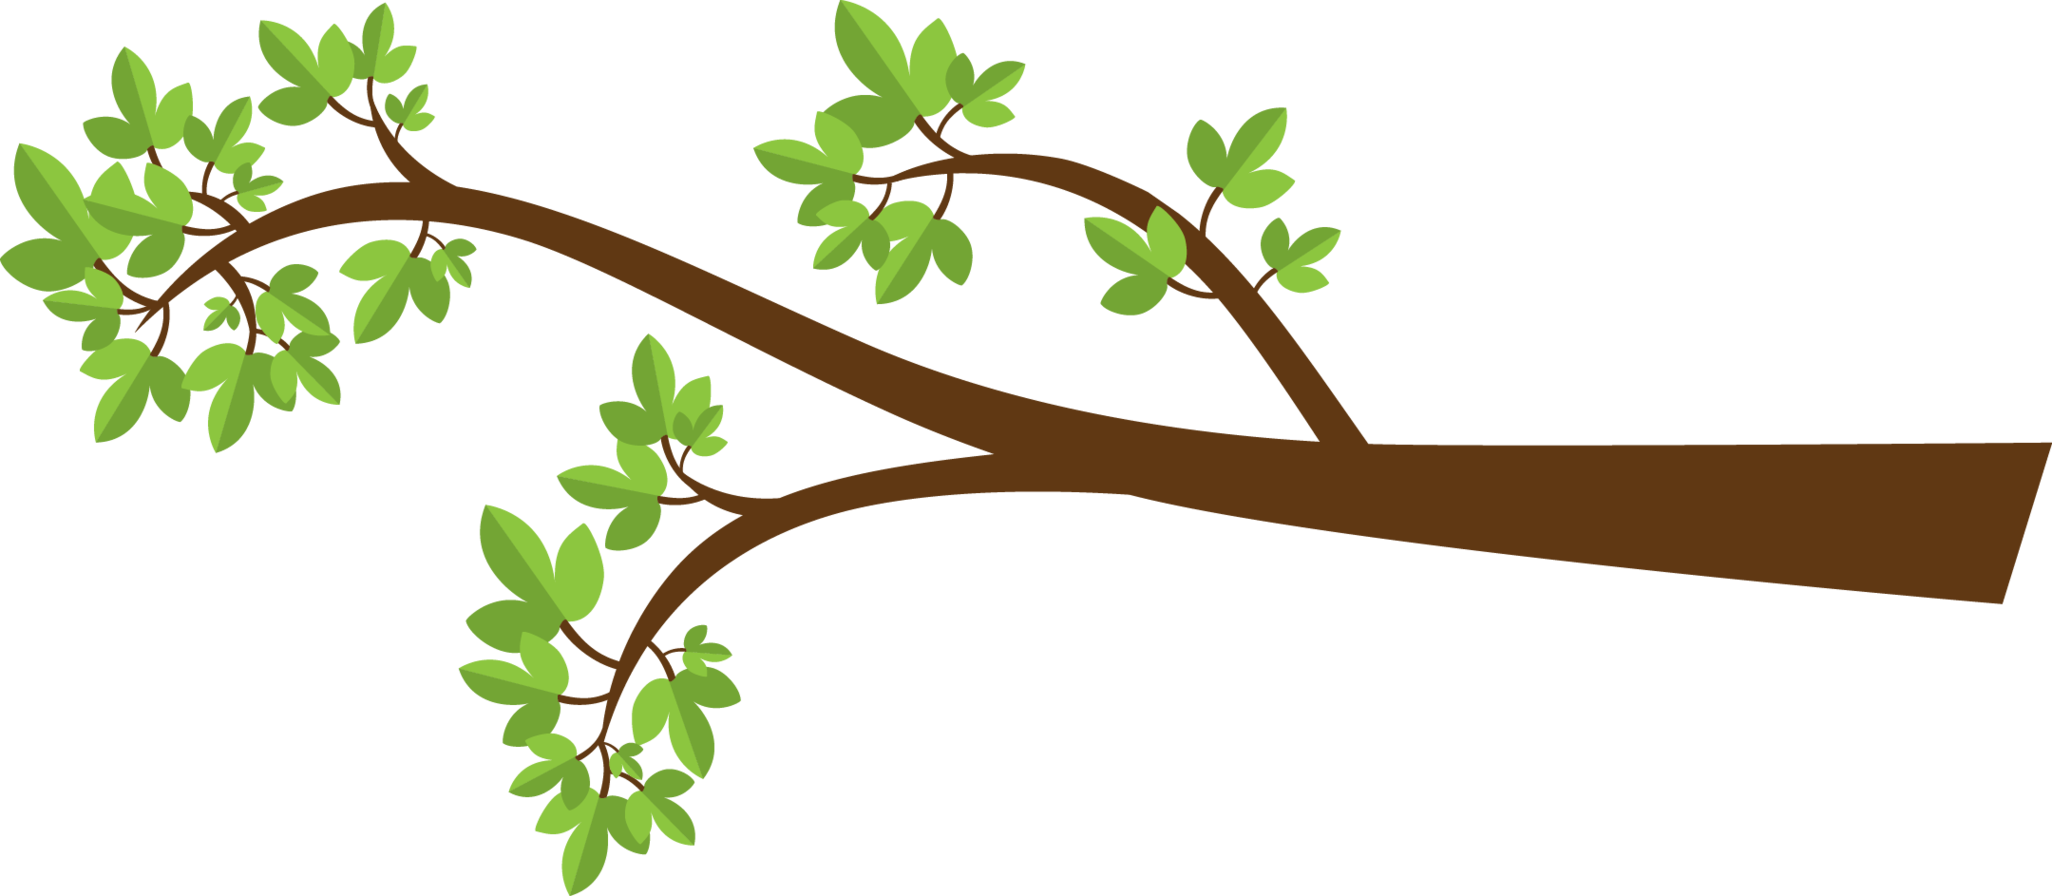 Tree Branches Clip Art. Tree Branch With Leaves .